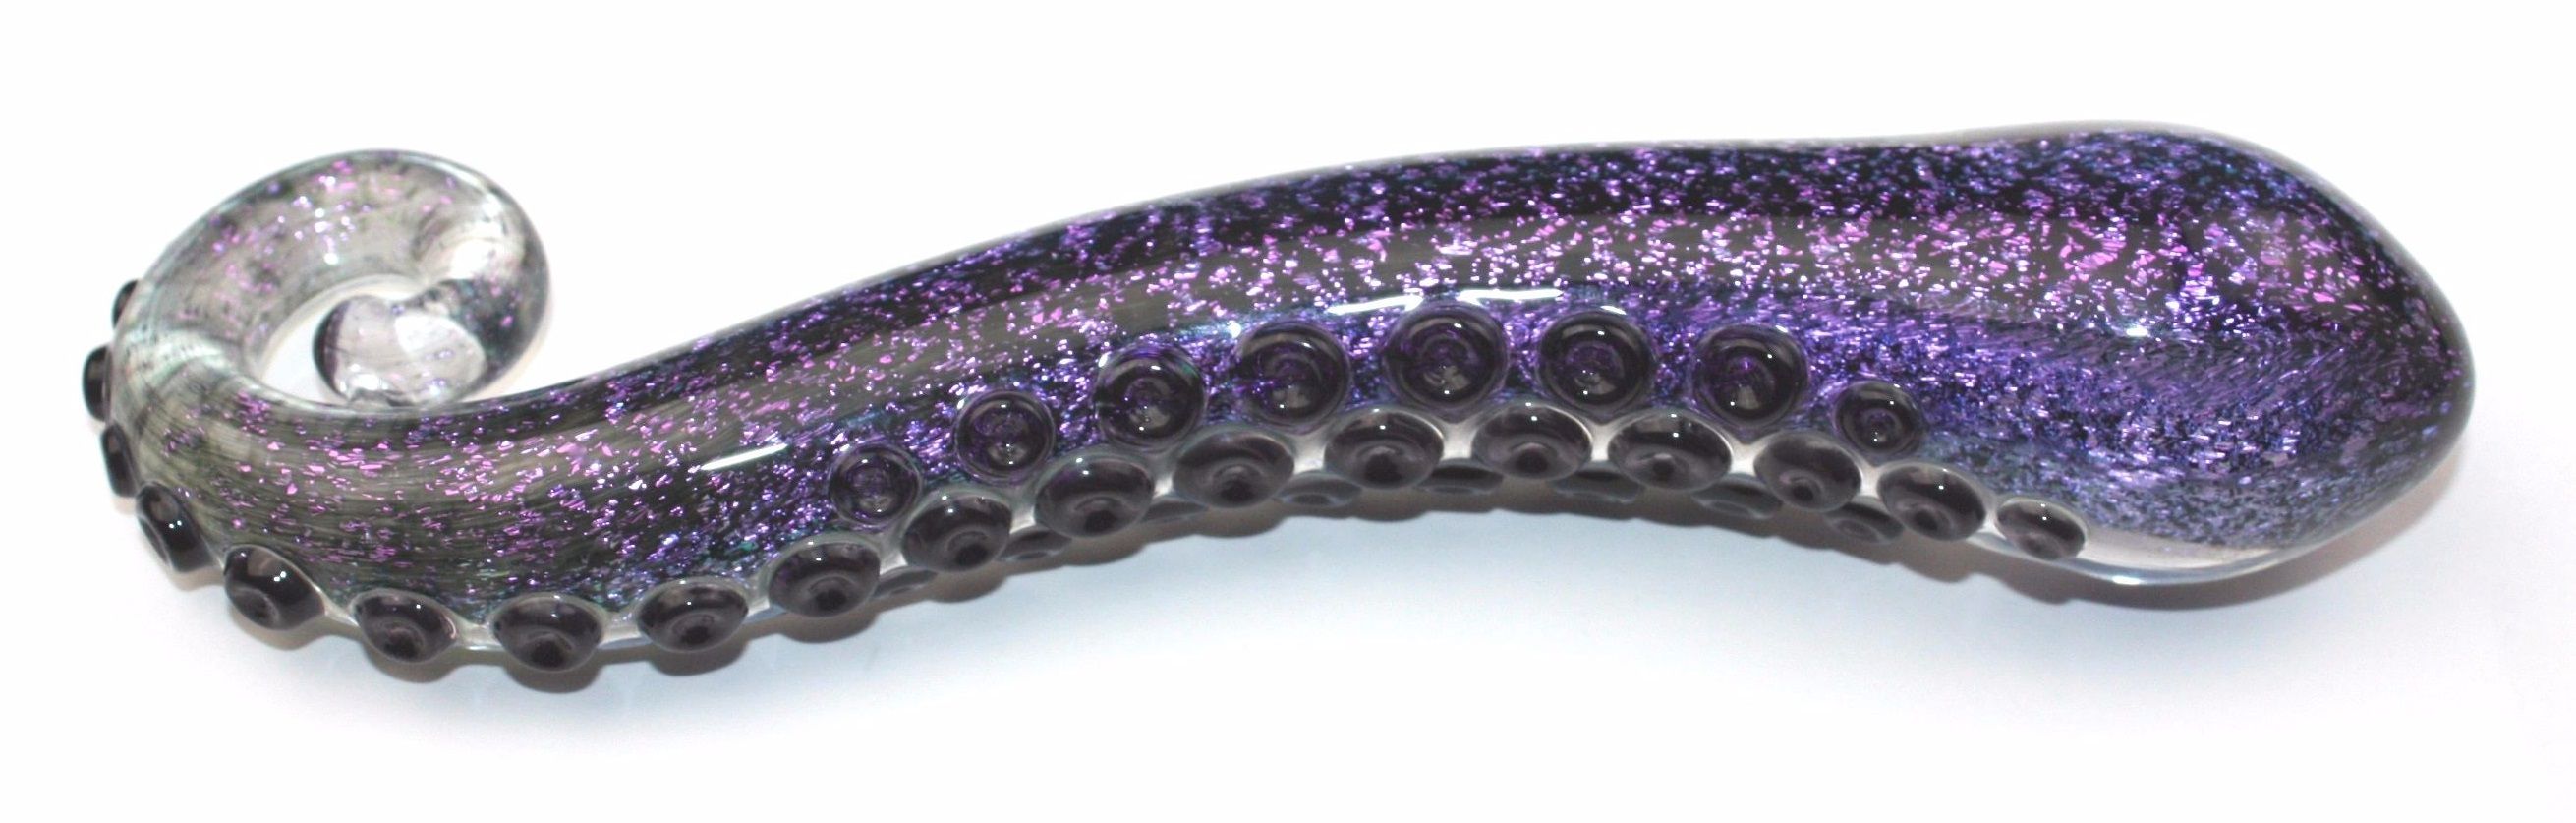 This dildo is amazing craftsmanship and it looks stunning